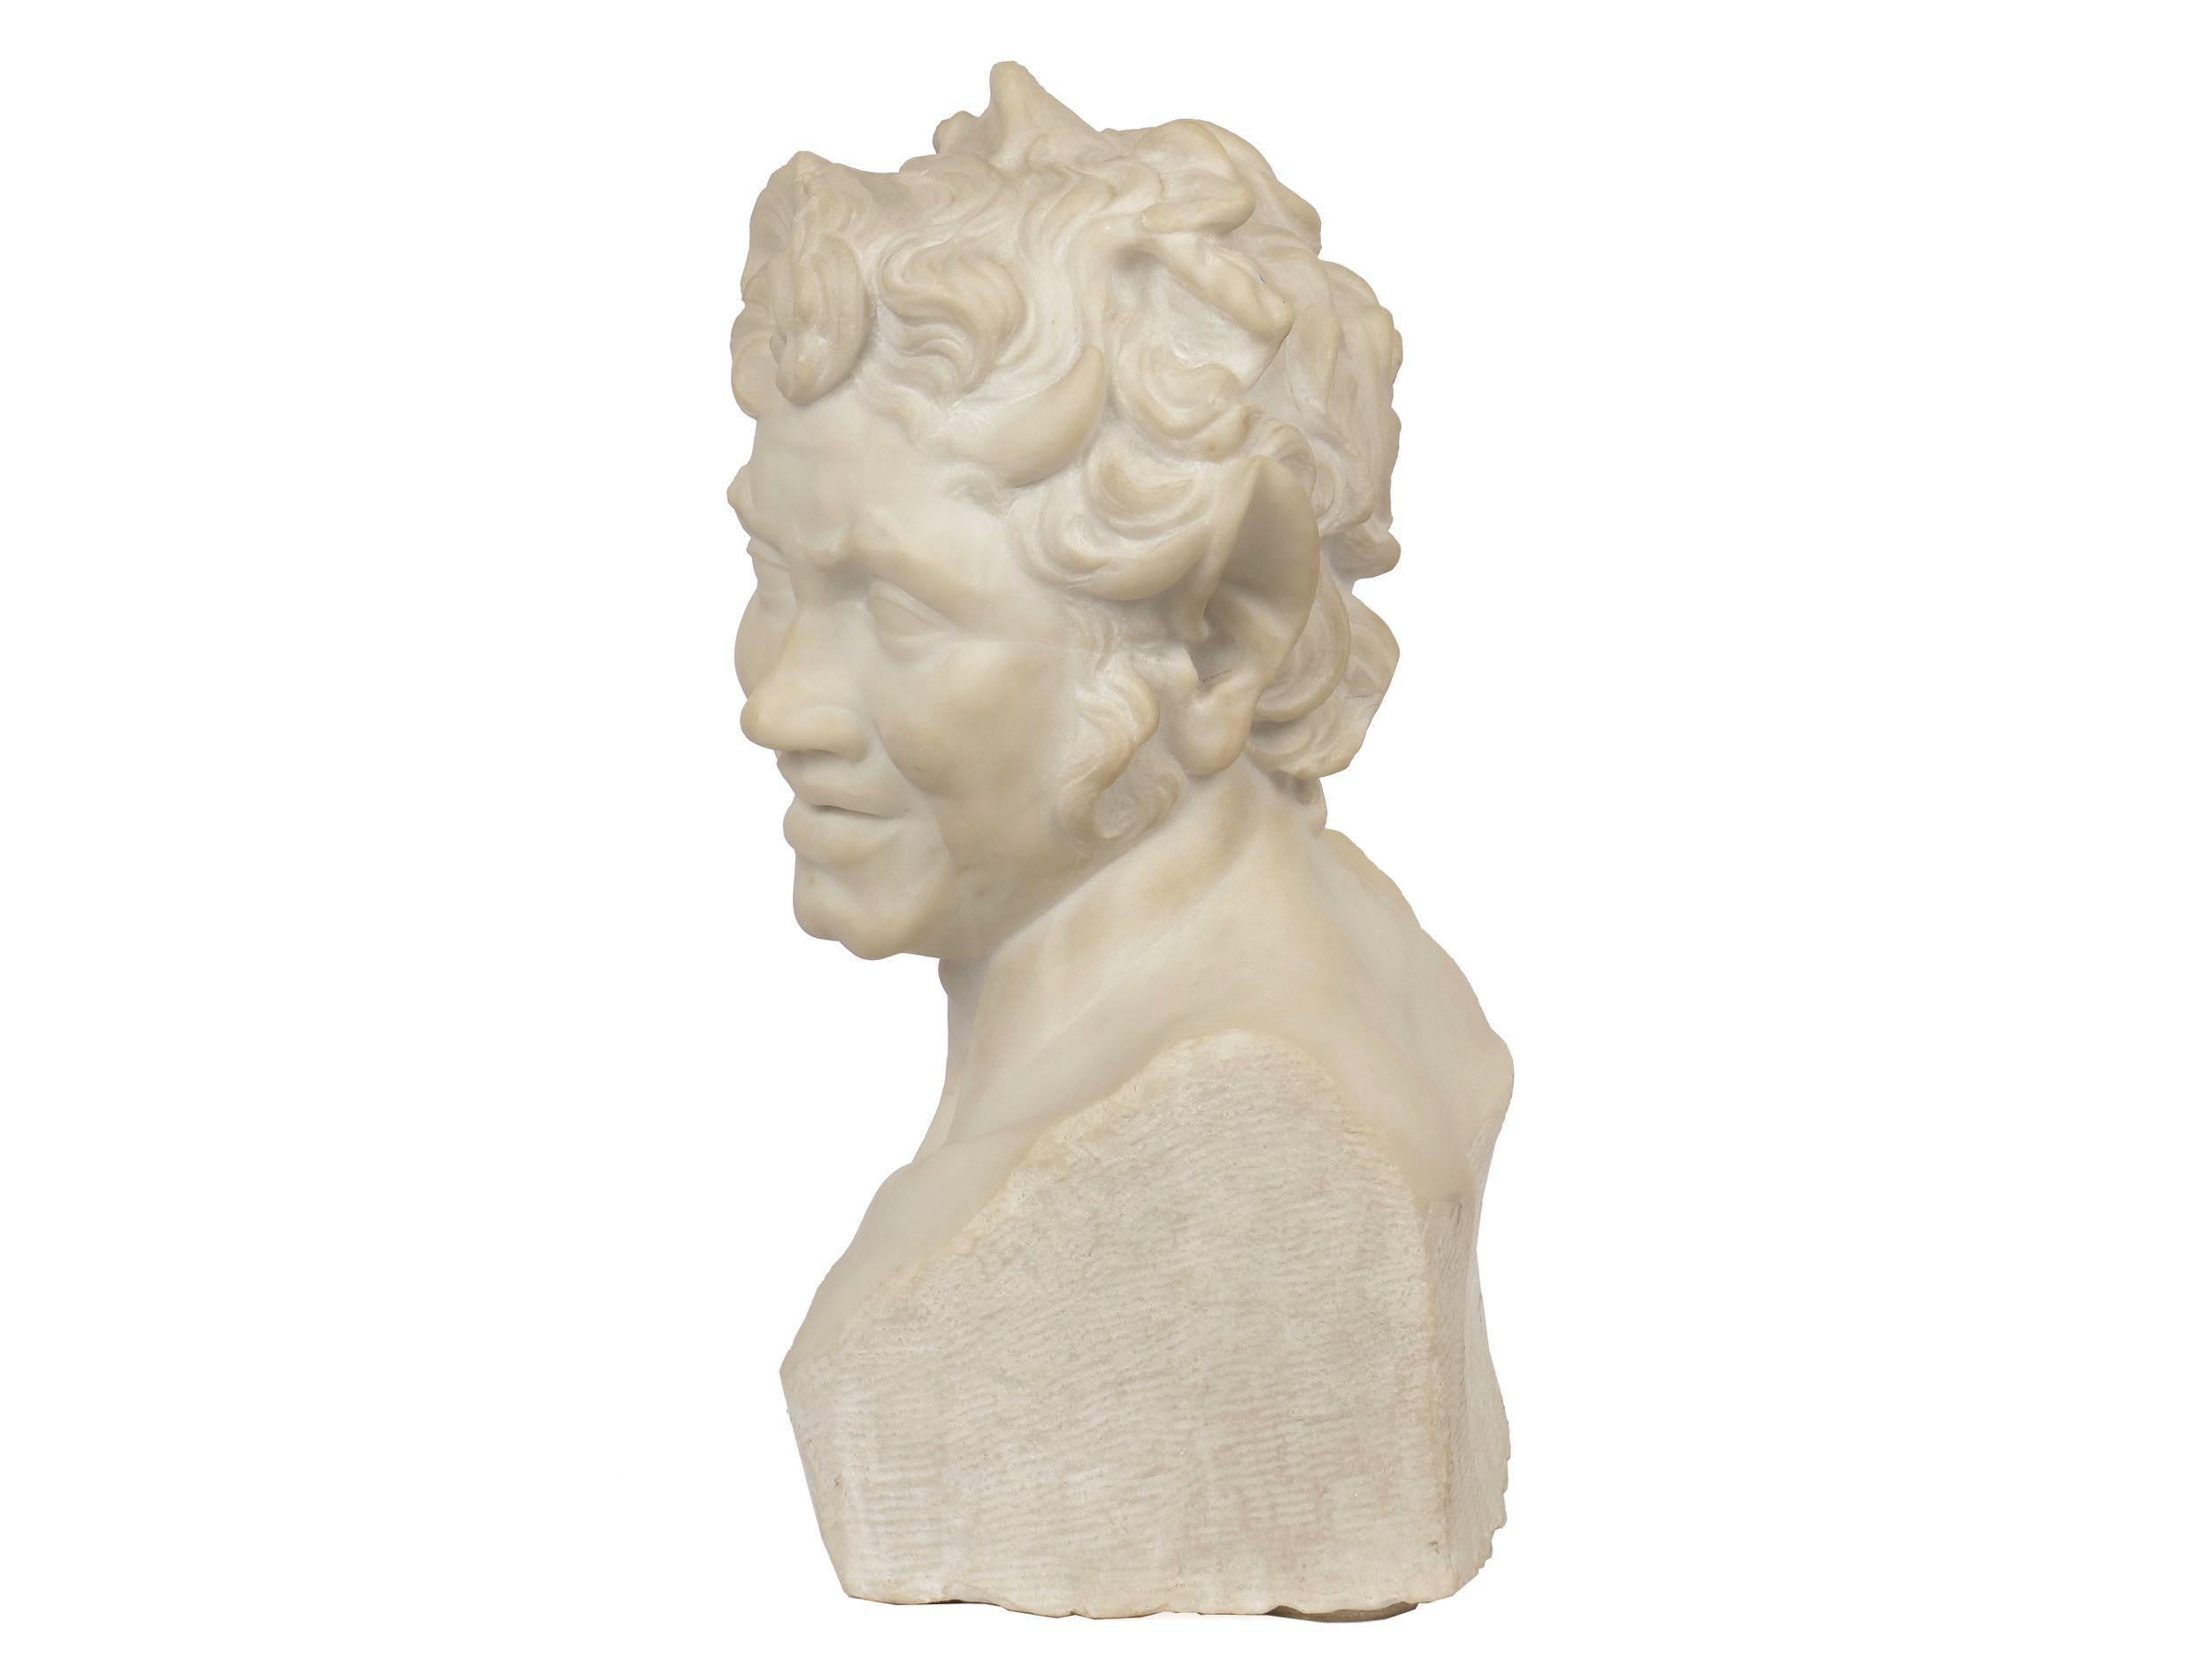 A whimsical and playful work from the mid to late 19th century, this fine marble bust depicts a jovial satyr as he looks off at some distant point. His eyes are bright and a smile tugs at his lips and cheeks. Beautifully conceived, the bust has a